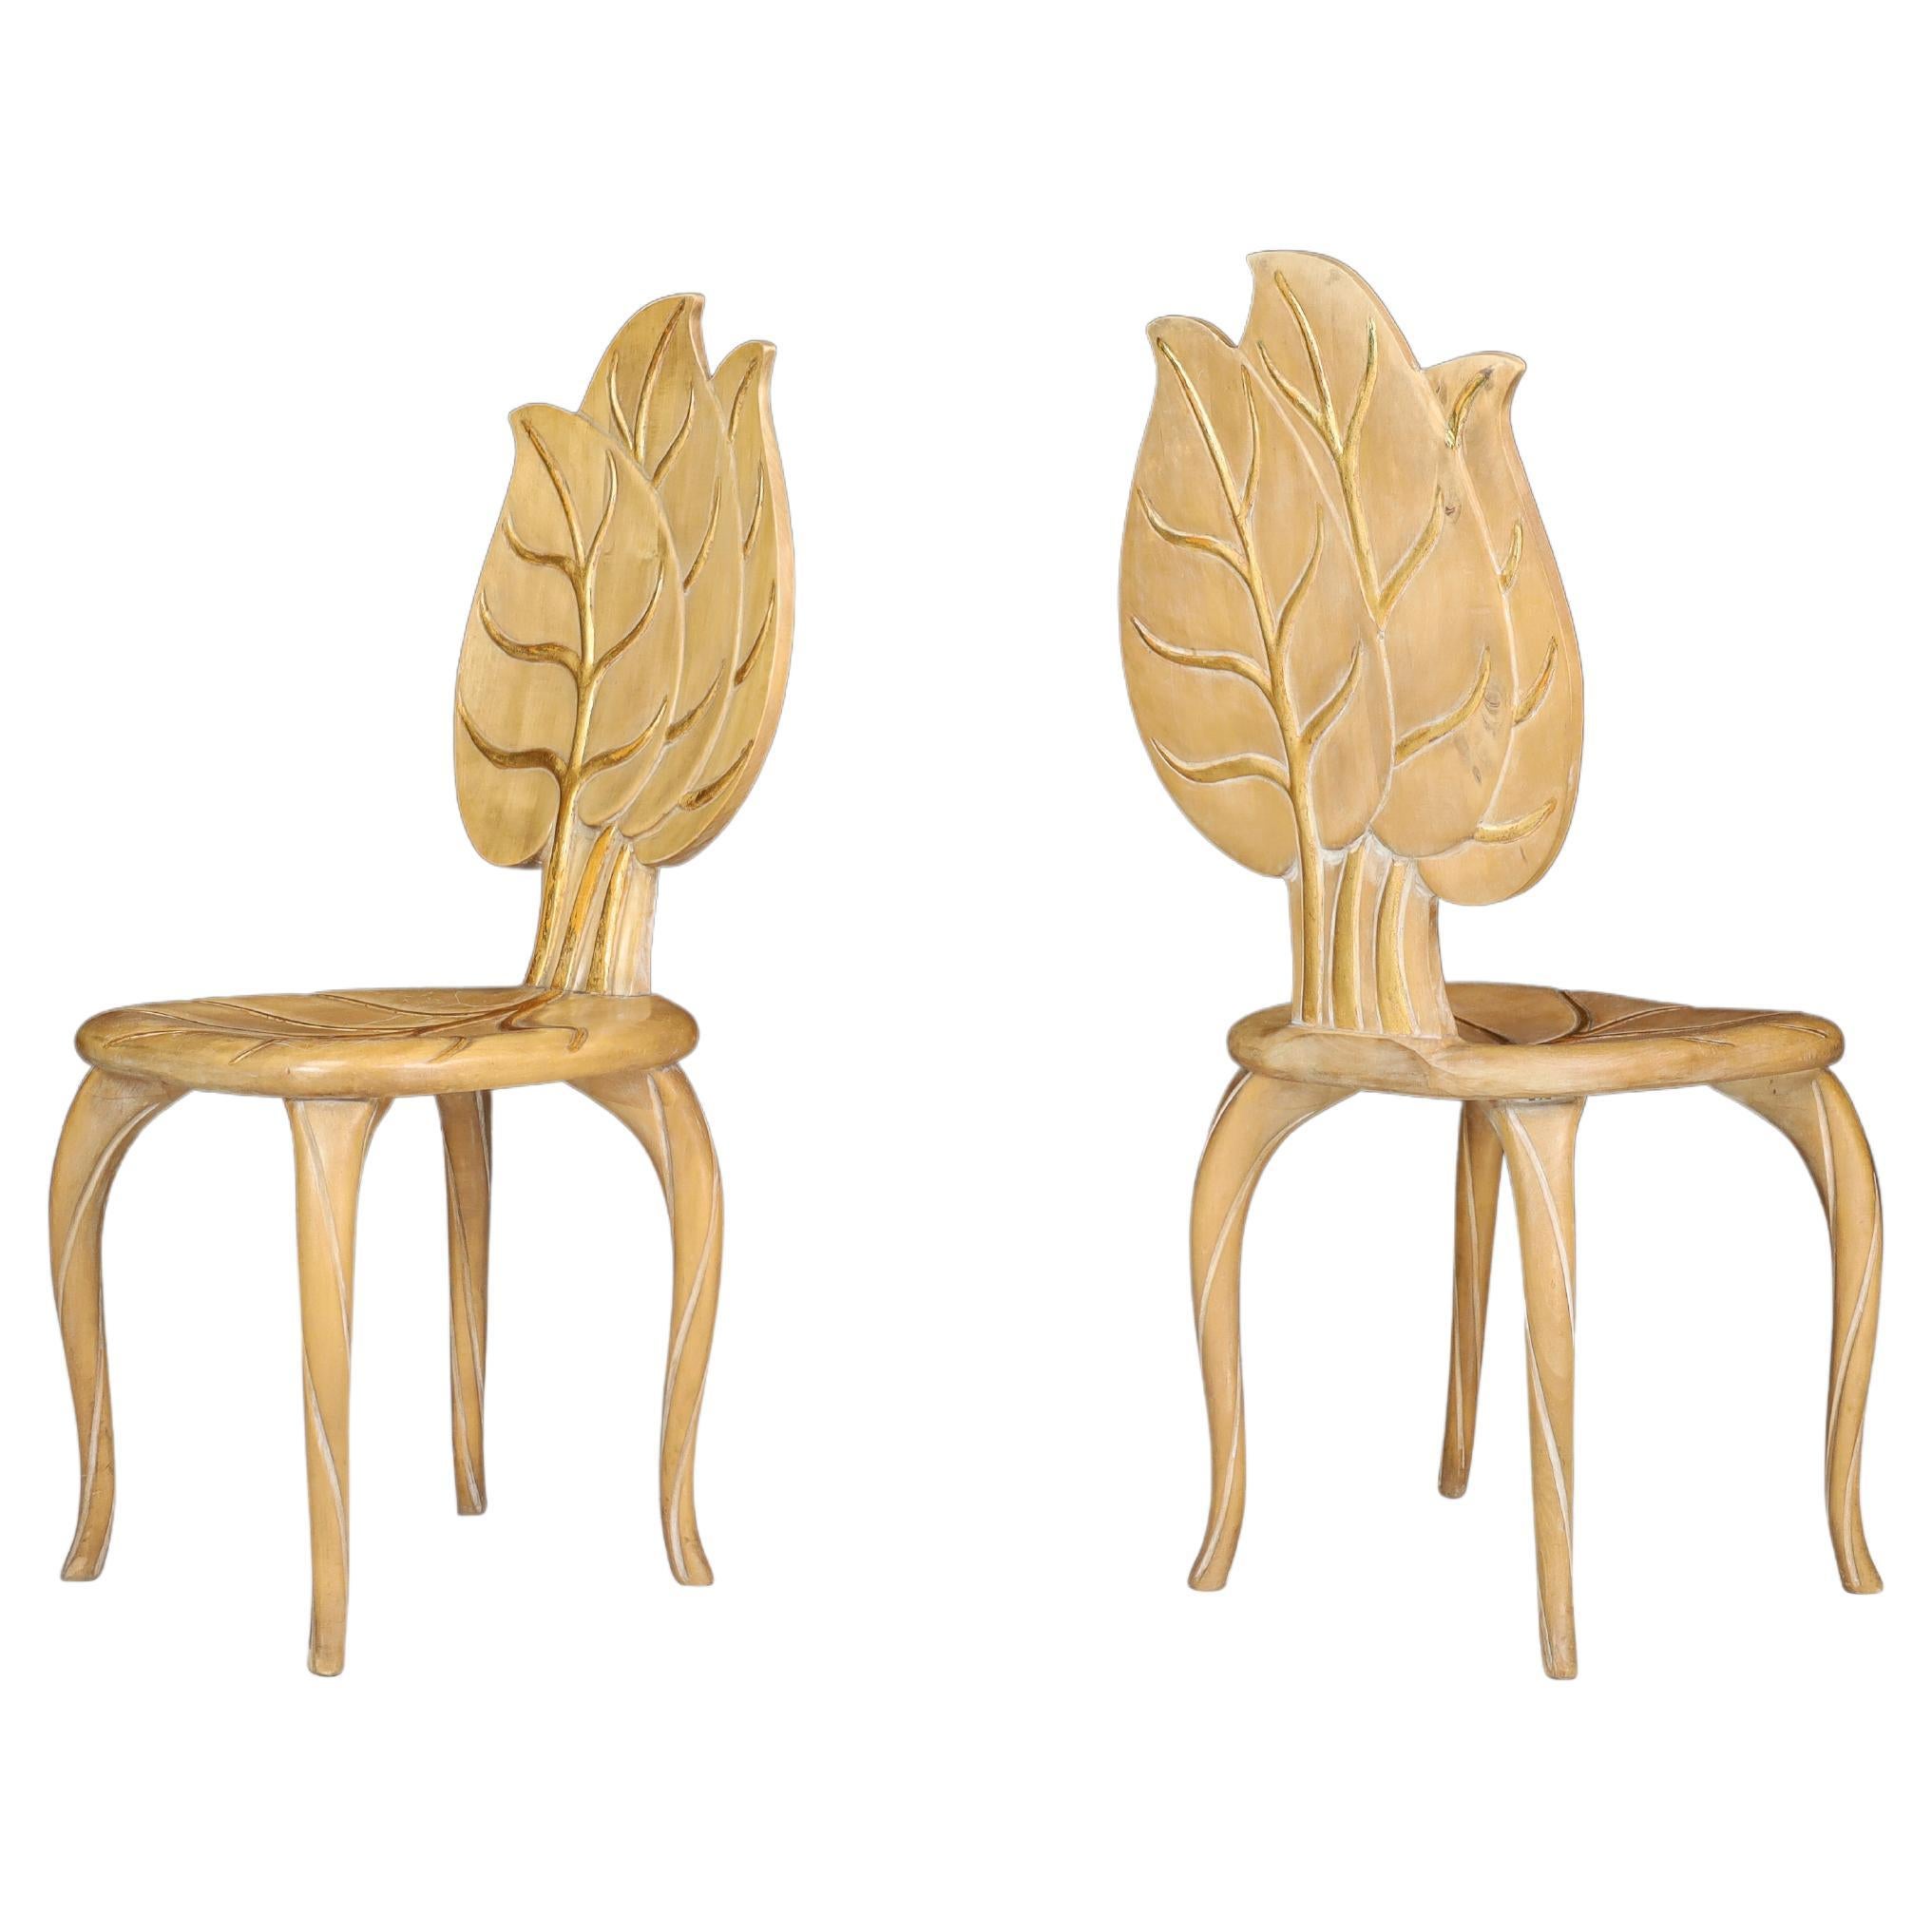 Bartolozzi & Maioli Wooden and Gold Leaf Chairs, Italy, 1970s  For Sale